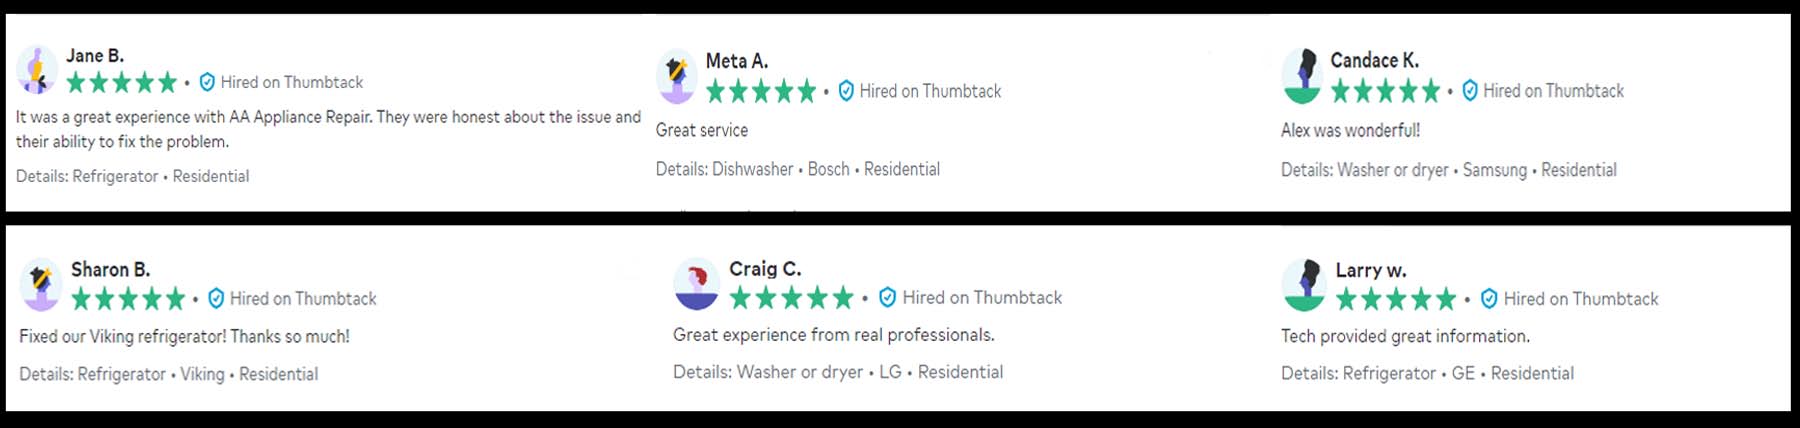 Top-rated Appliance Repair Service in Austin with 5-Star Customer Reviews